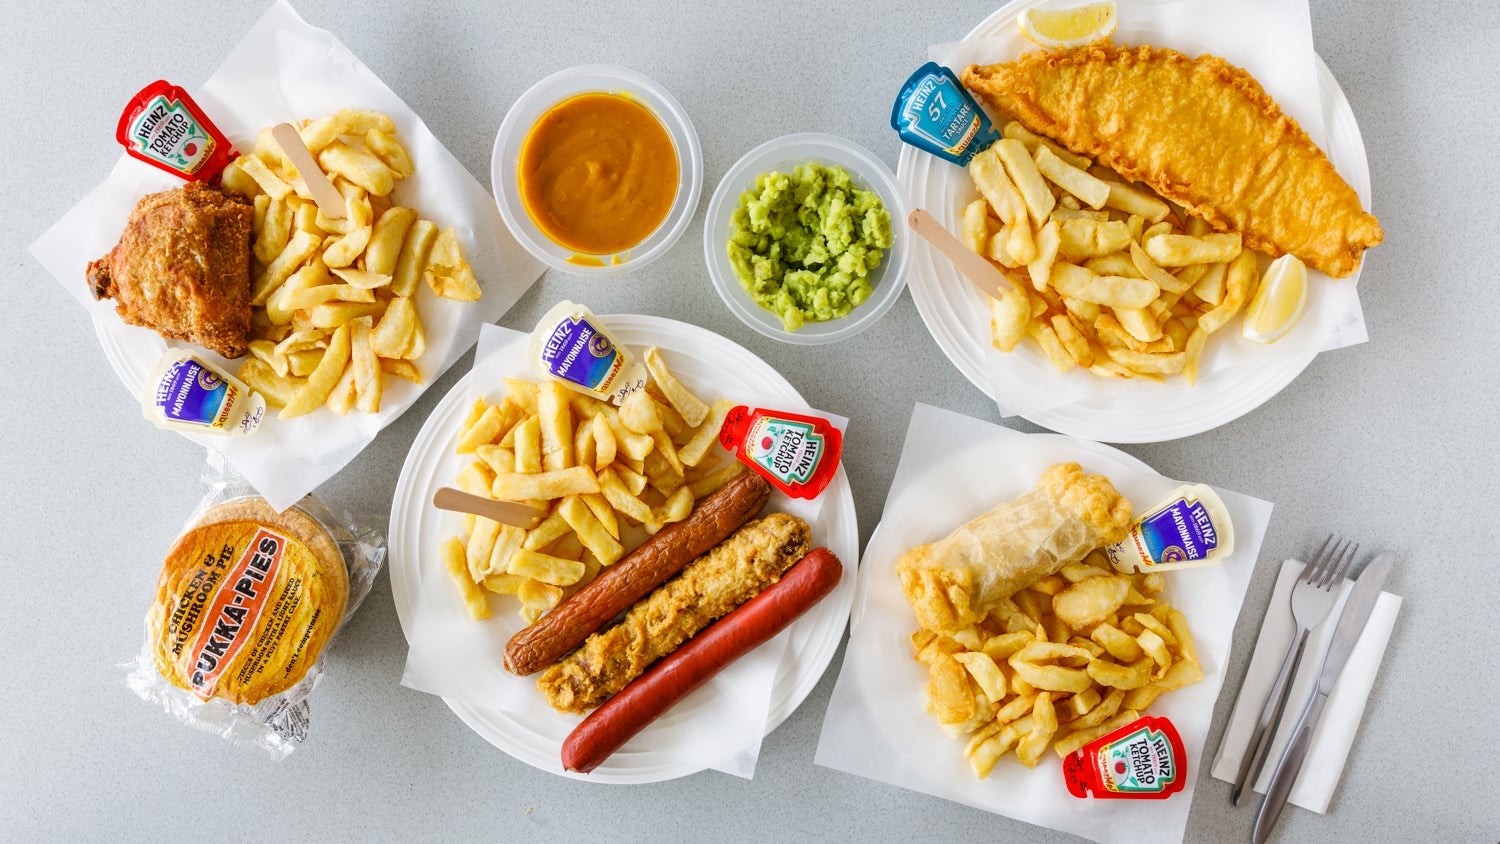 Star Fish and Chips Takeaway